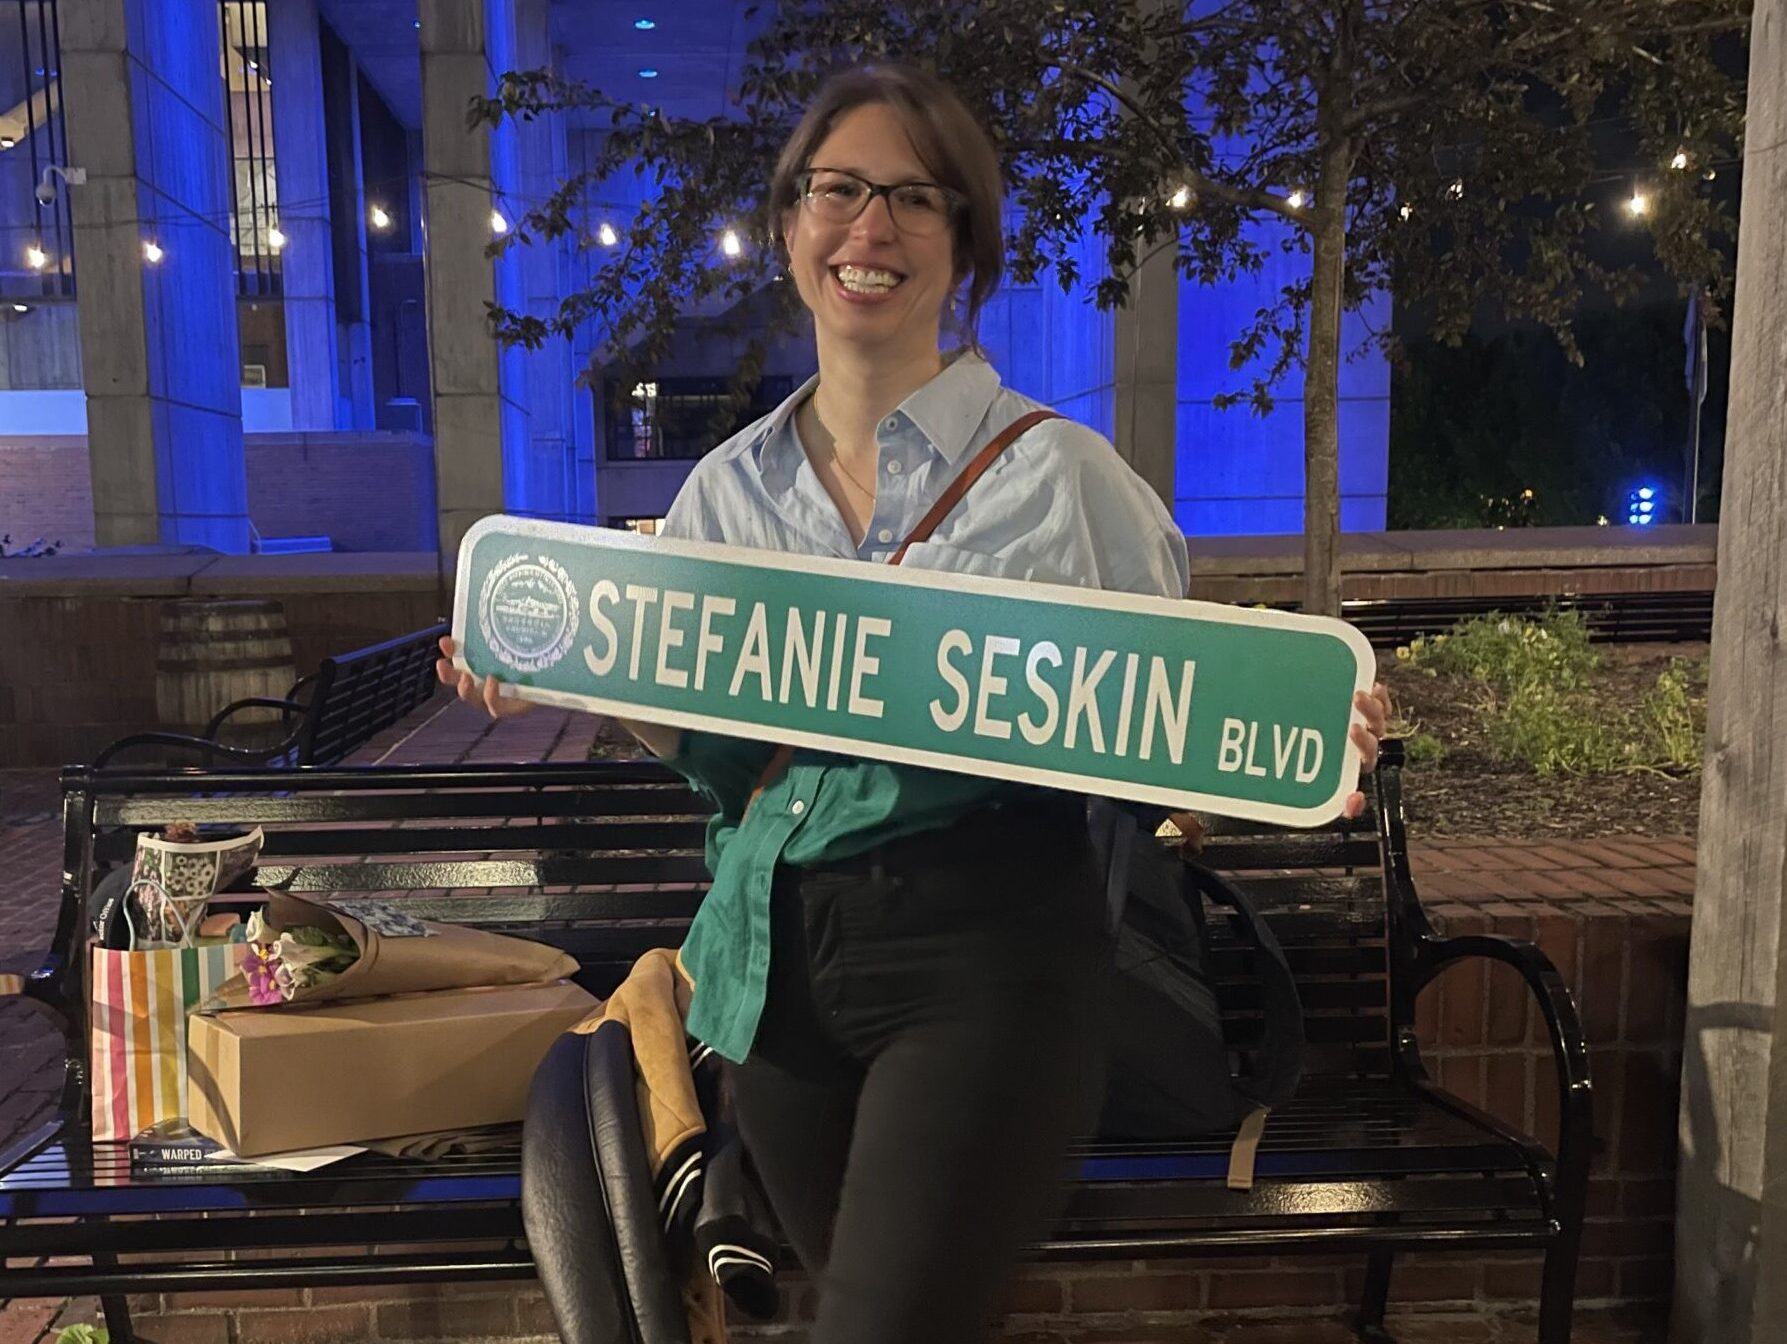 A nighttime photograph of a smiling woman wearing glasses poses holding a green street sign that reads "STEFANIE SESKIN BLVD". Behind her, Boston City Hall is lit up in blue lighting.